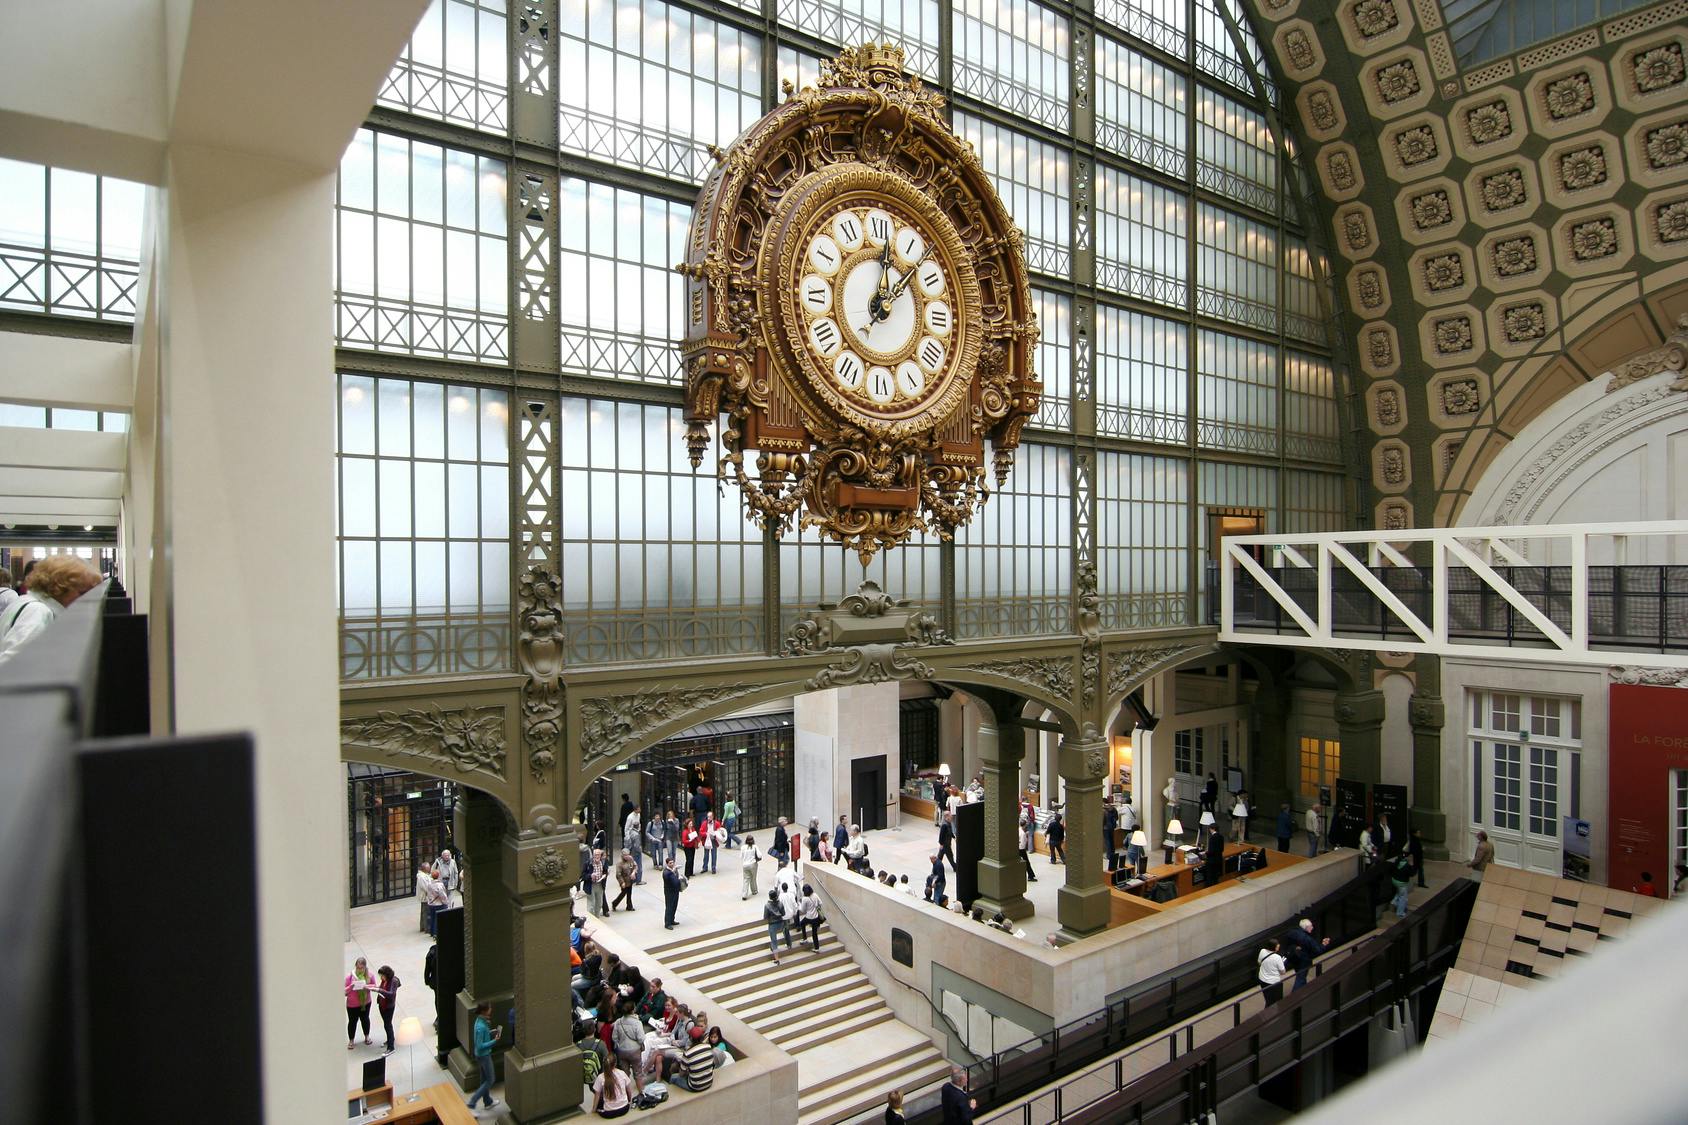 Ticket to Orsay Museum with dedicated entrance